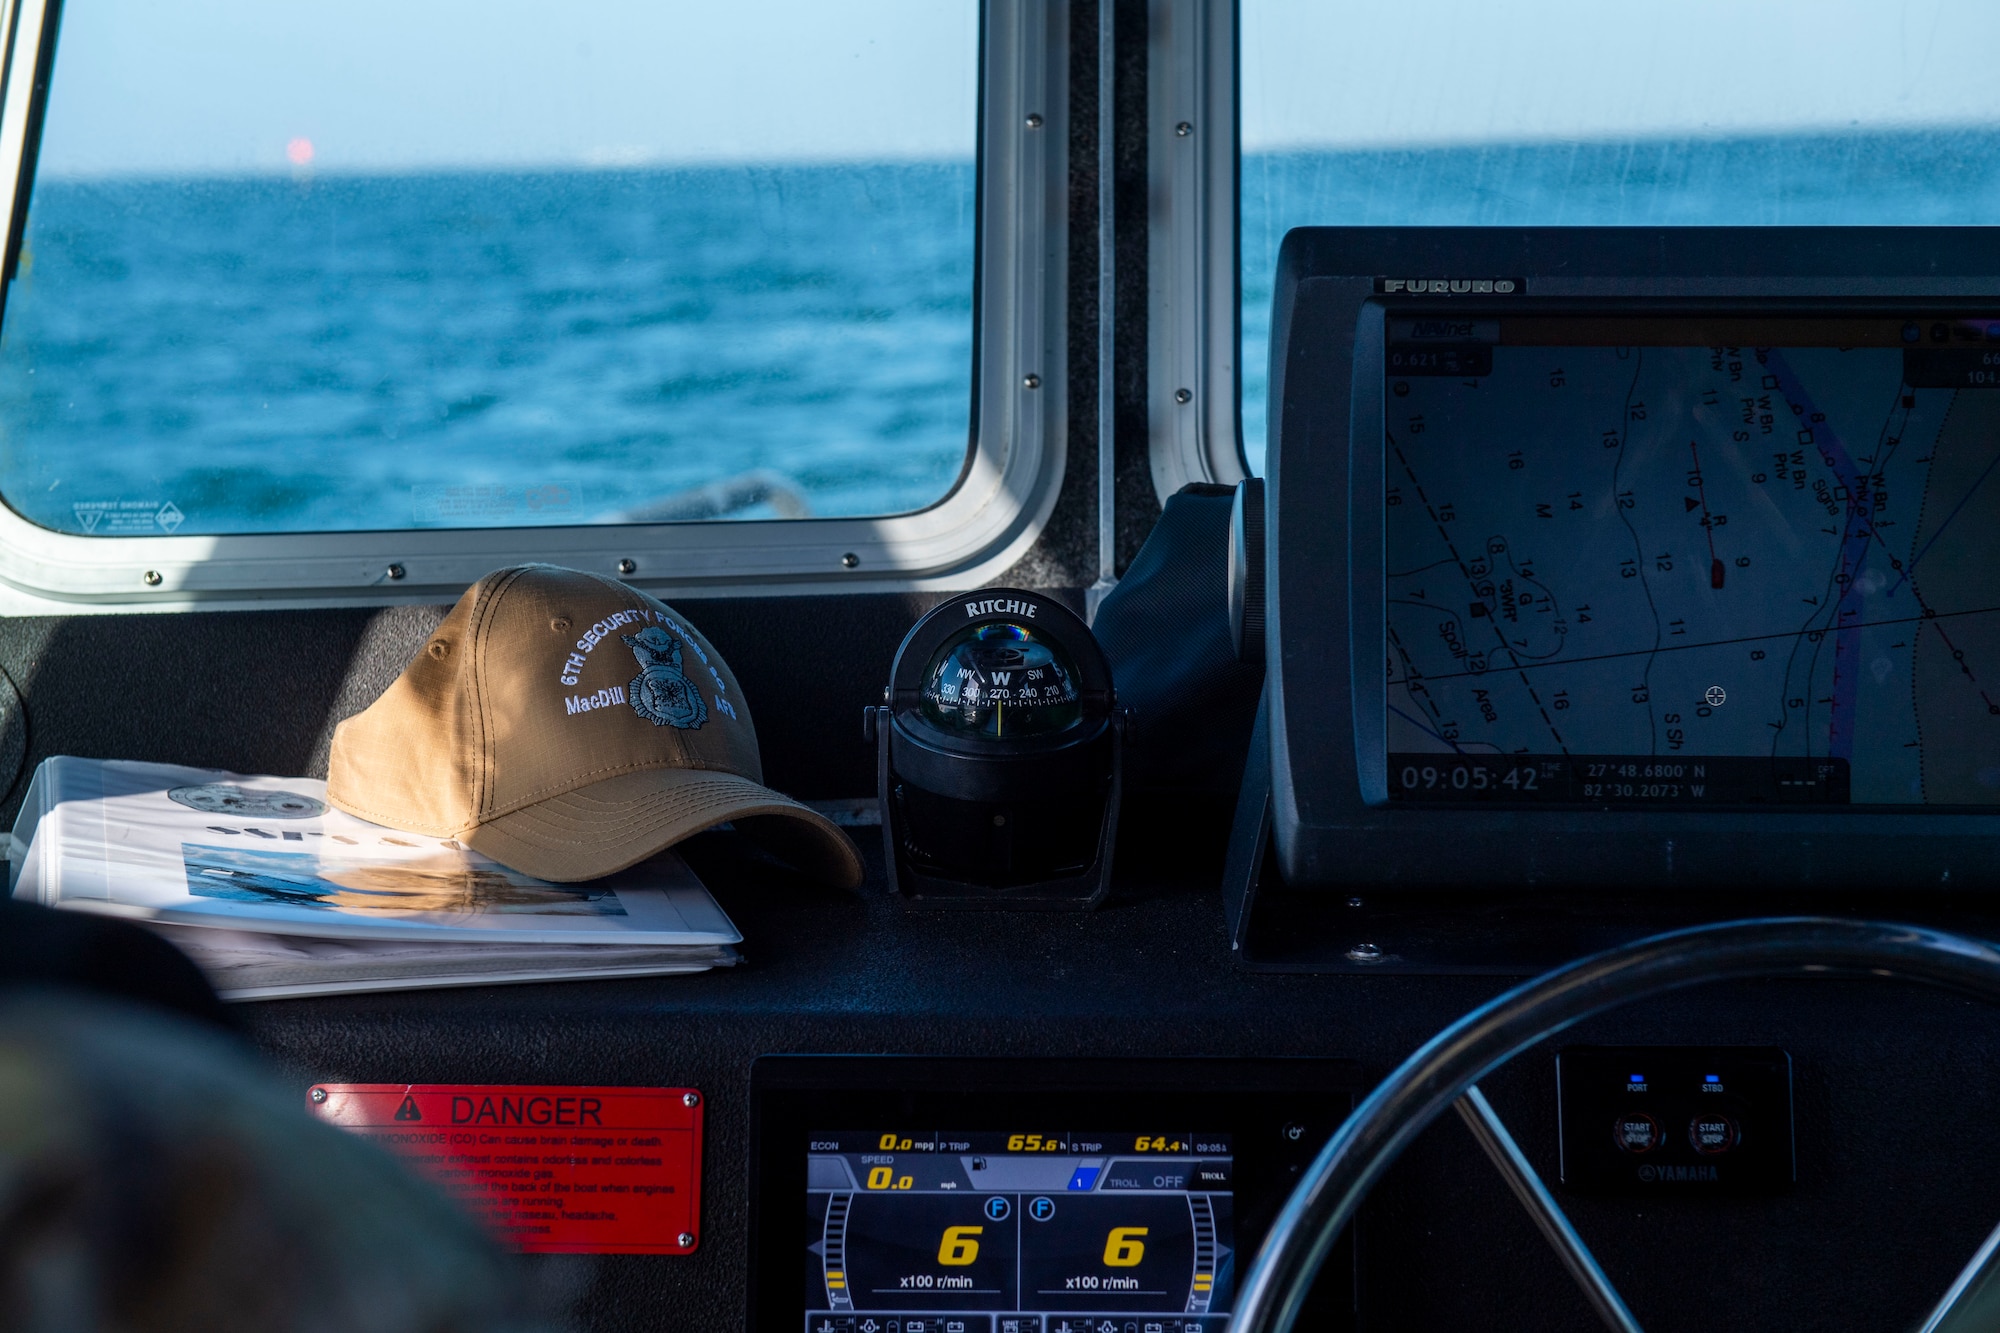 A 6th Security Forces Squadron marine patrol hat is shown on the dash of a marine patrol boat in Tampa Bay, Florida, March 7, 2022.